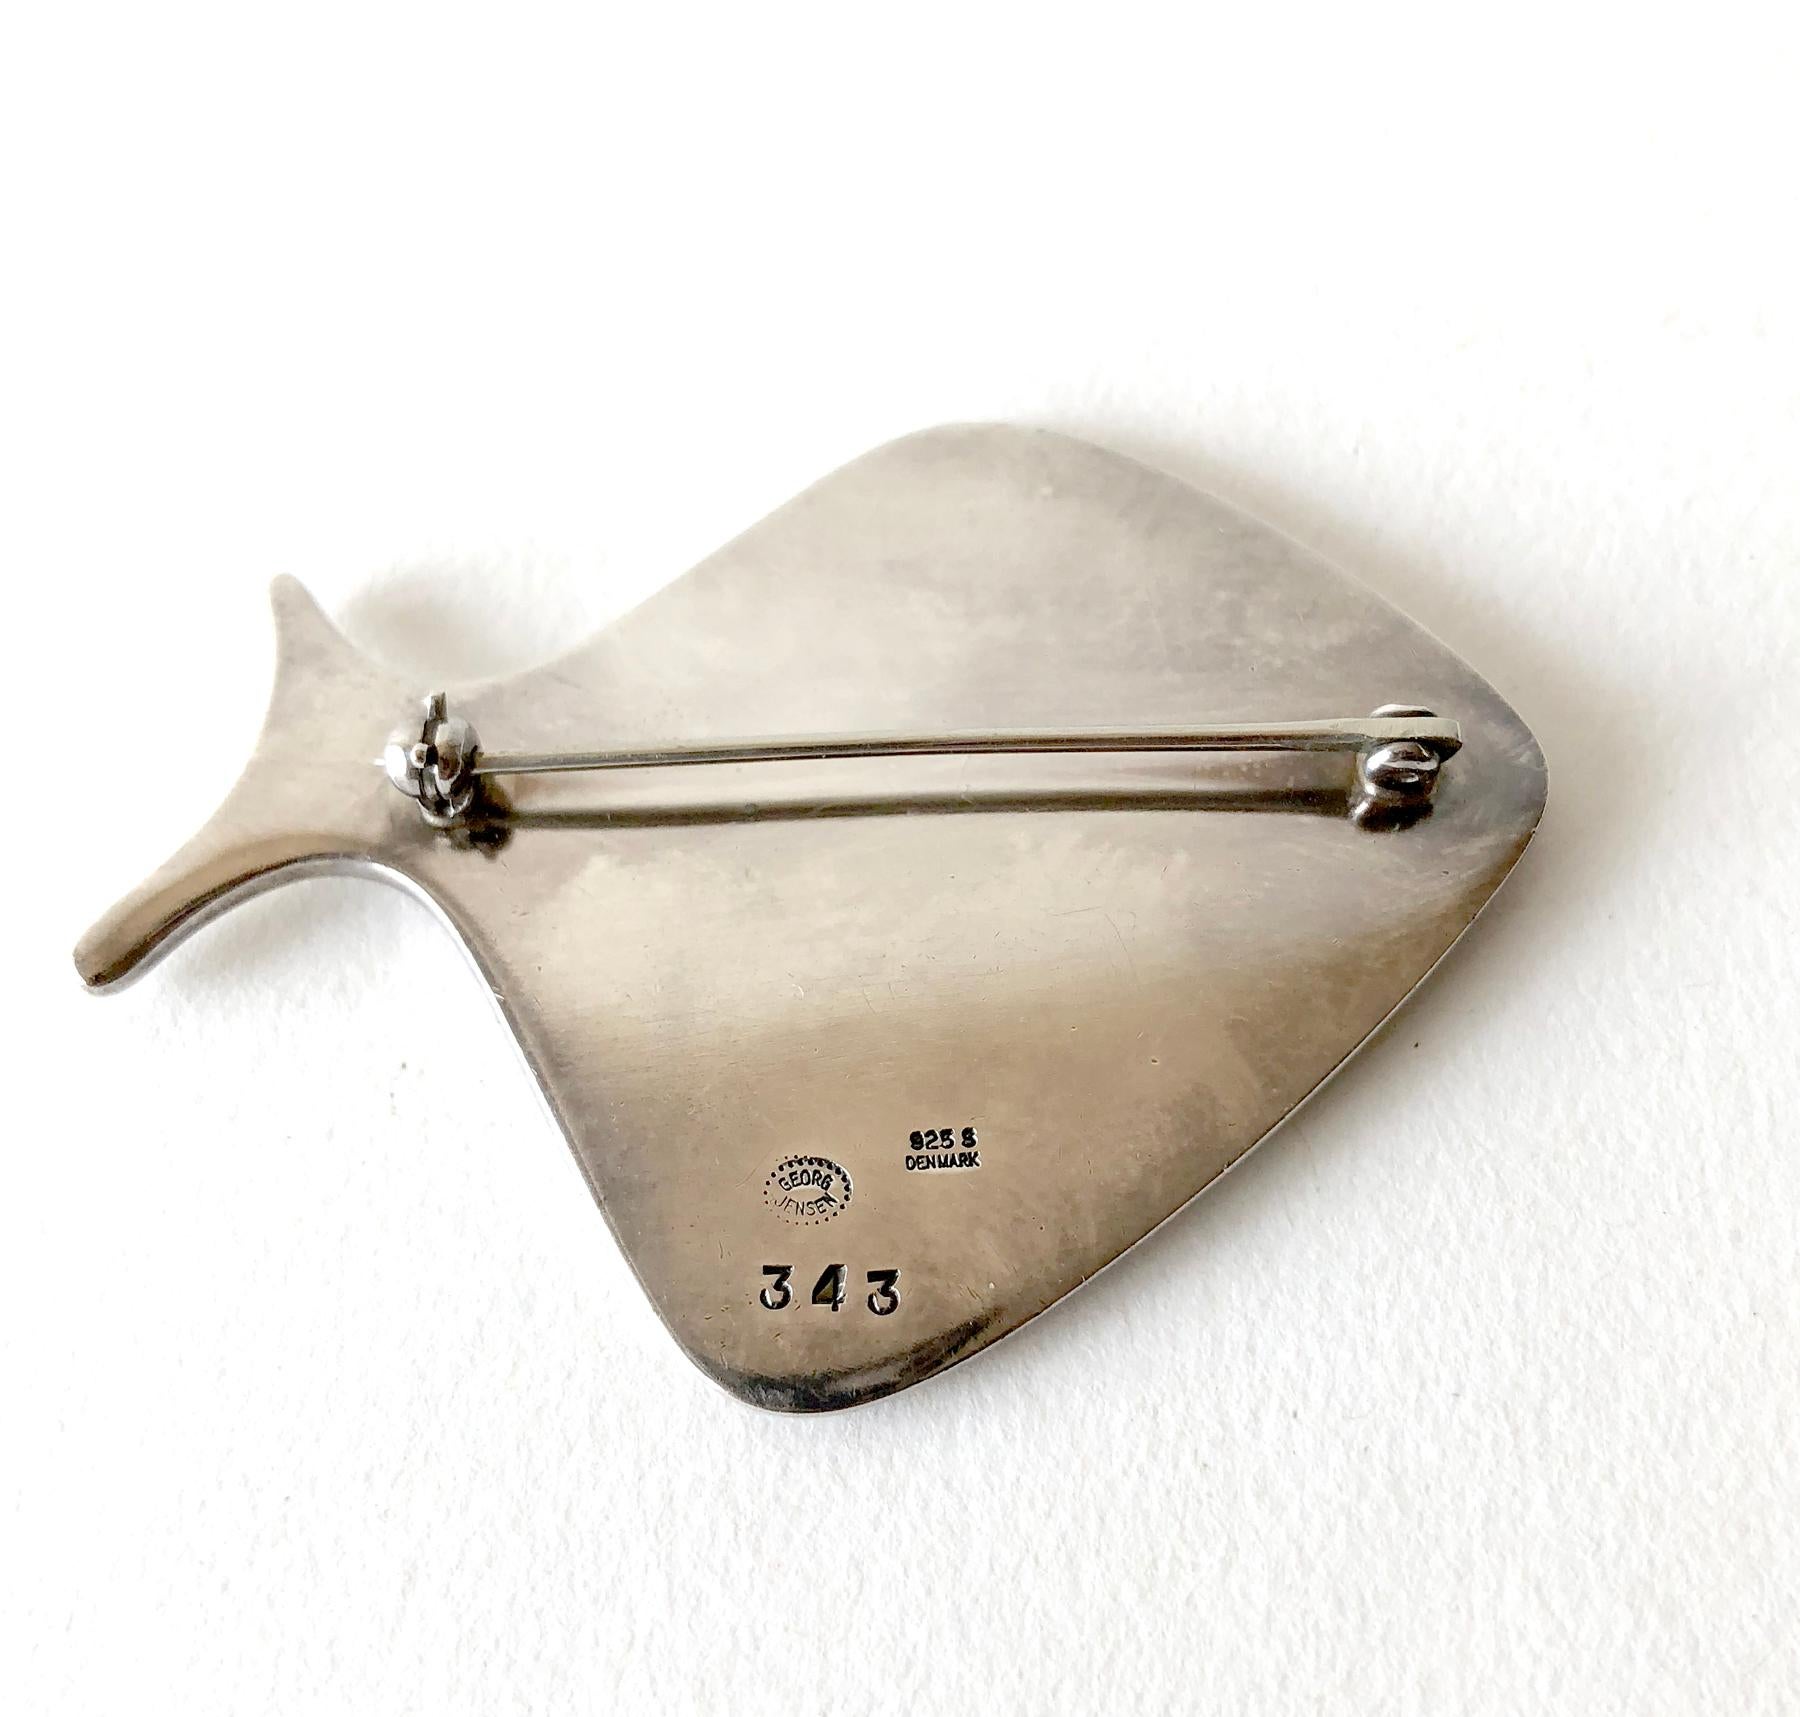 Iconic Danish modernist sterling silver fish brooch by Henning Koppel for Georg Jensen.  Brooch measures 1 3/4 by 2 3/8